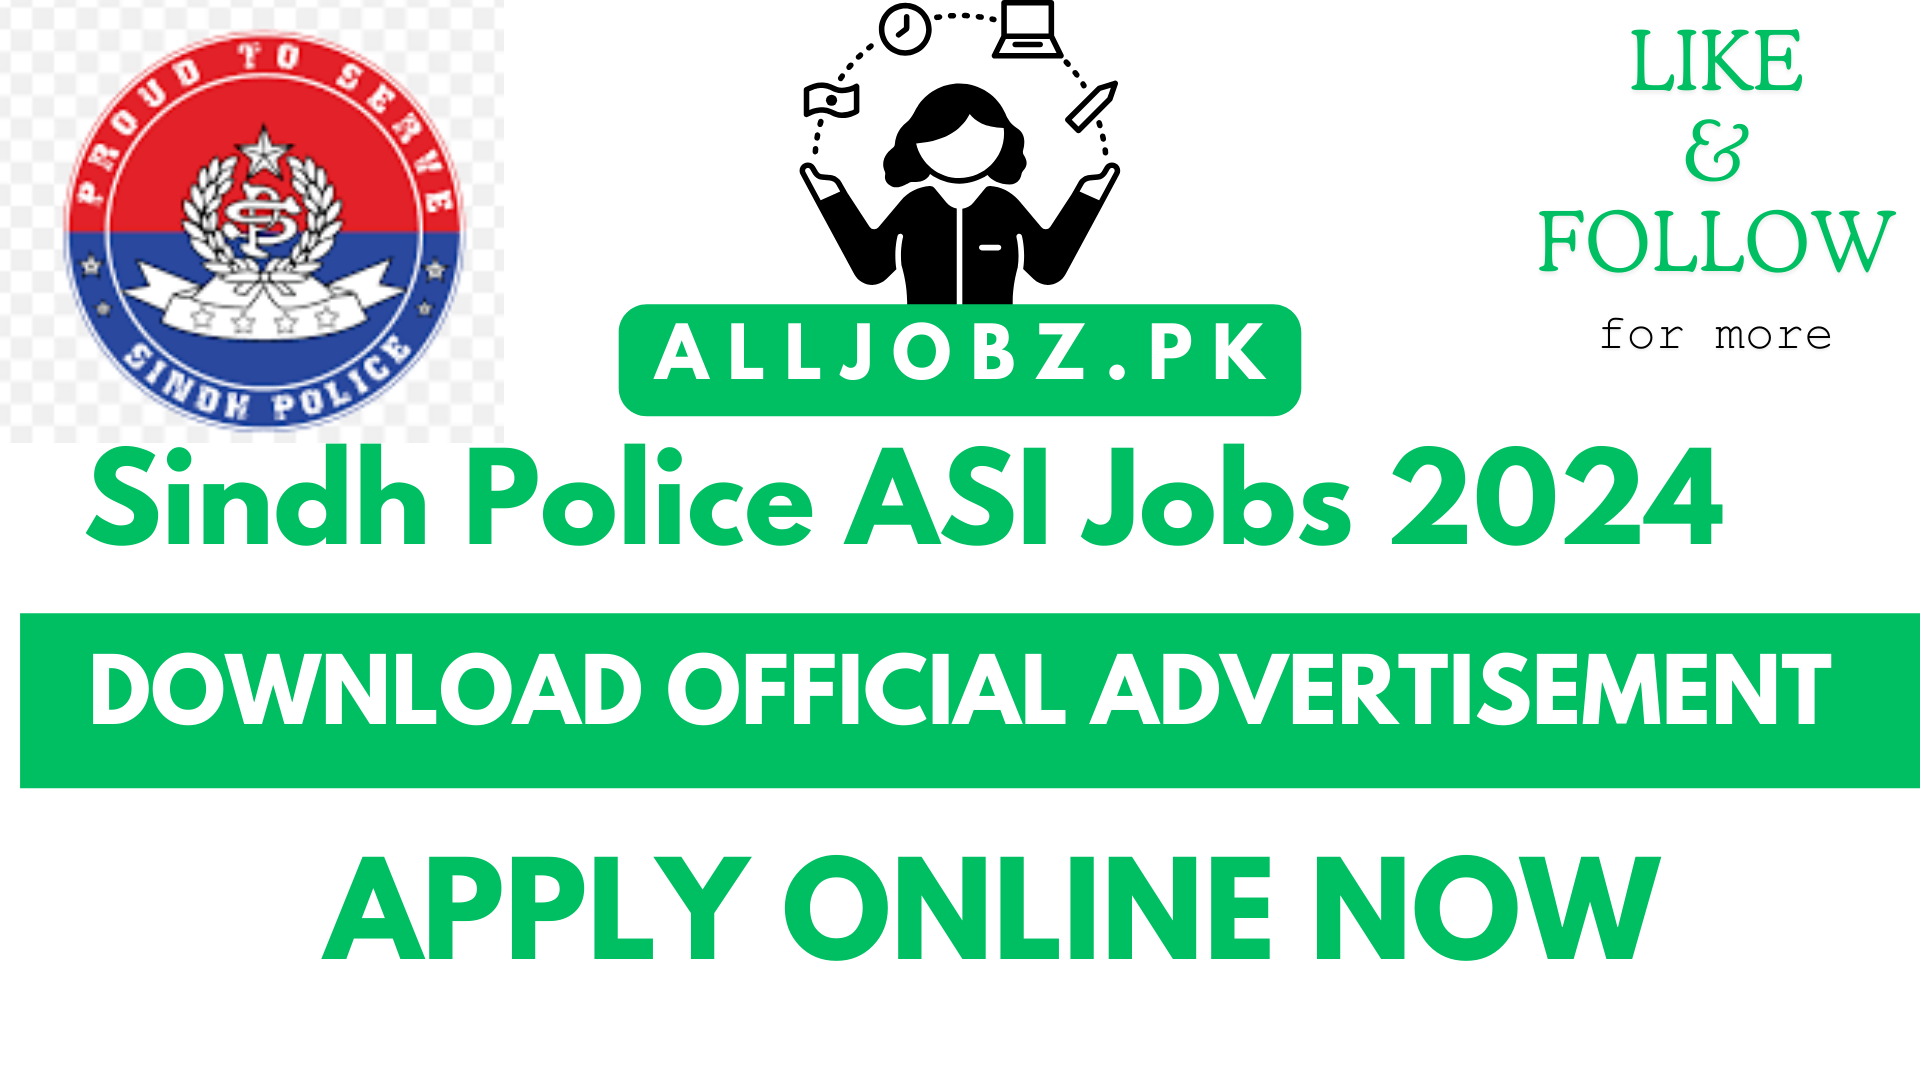 Sindh Police Asi Jobs 2024 Online Apply, Sindh Police Jobs, Asi Recruitment, Sindh Police Vacancies, Sindh Police Asi Eligibility, Asi Application Process, Sindh Police Asi Age Limit, Sindh Police Physical Standards, Sindh Police Asi Salary, Sindh Police Asi Benefits, Sindh Police Asi Requirements, Sindh Police Asi Physical Endurance Test, Sindh Police Asi Application Deadline, Sindh Police Asi Online Application, Sindh Police Asi Official Website, Sindh Police Asi Recruitment Rules.